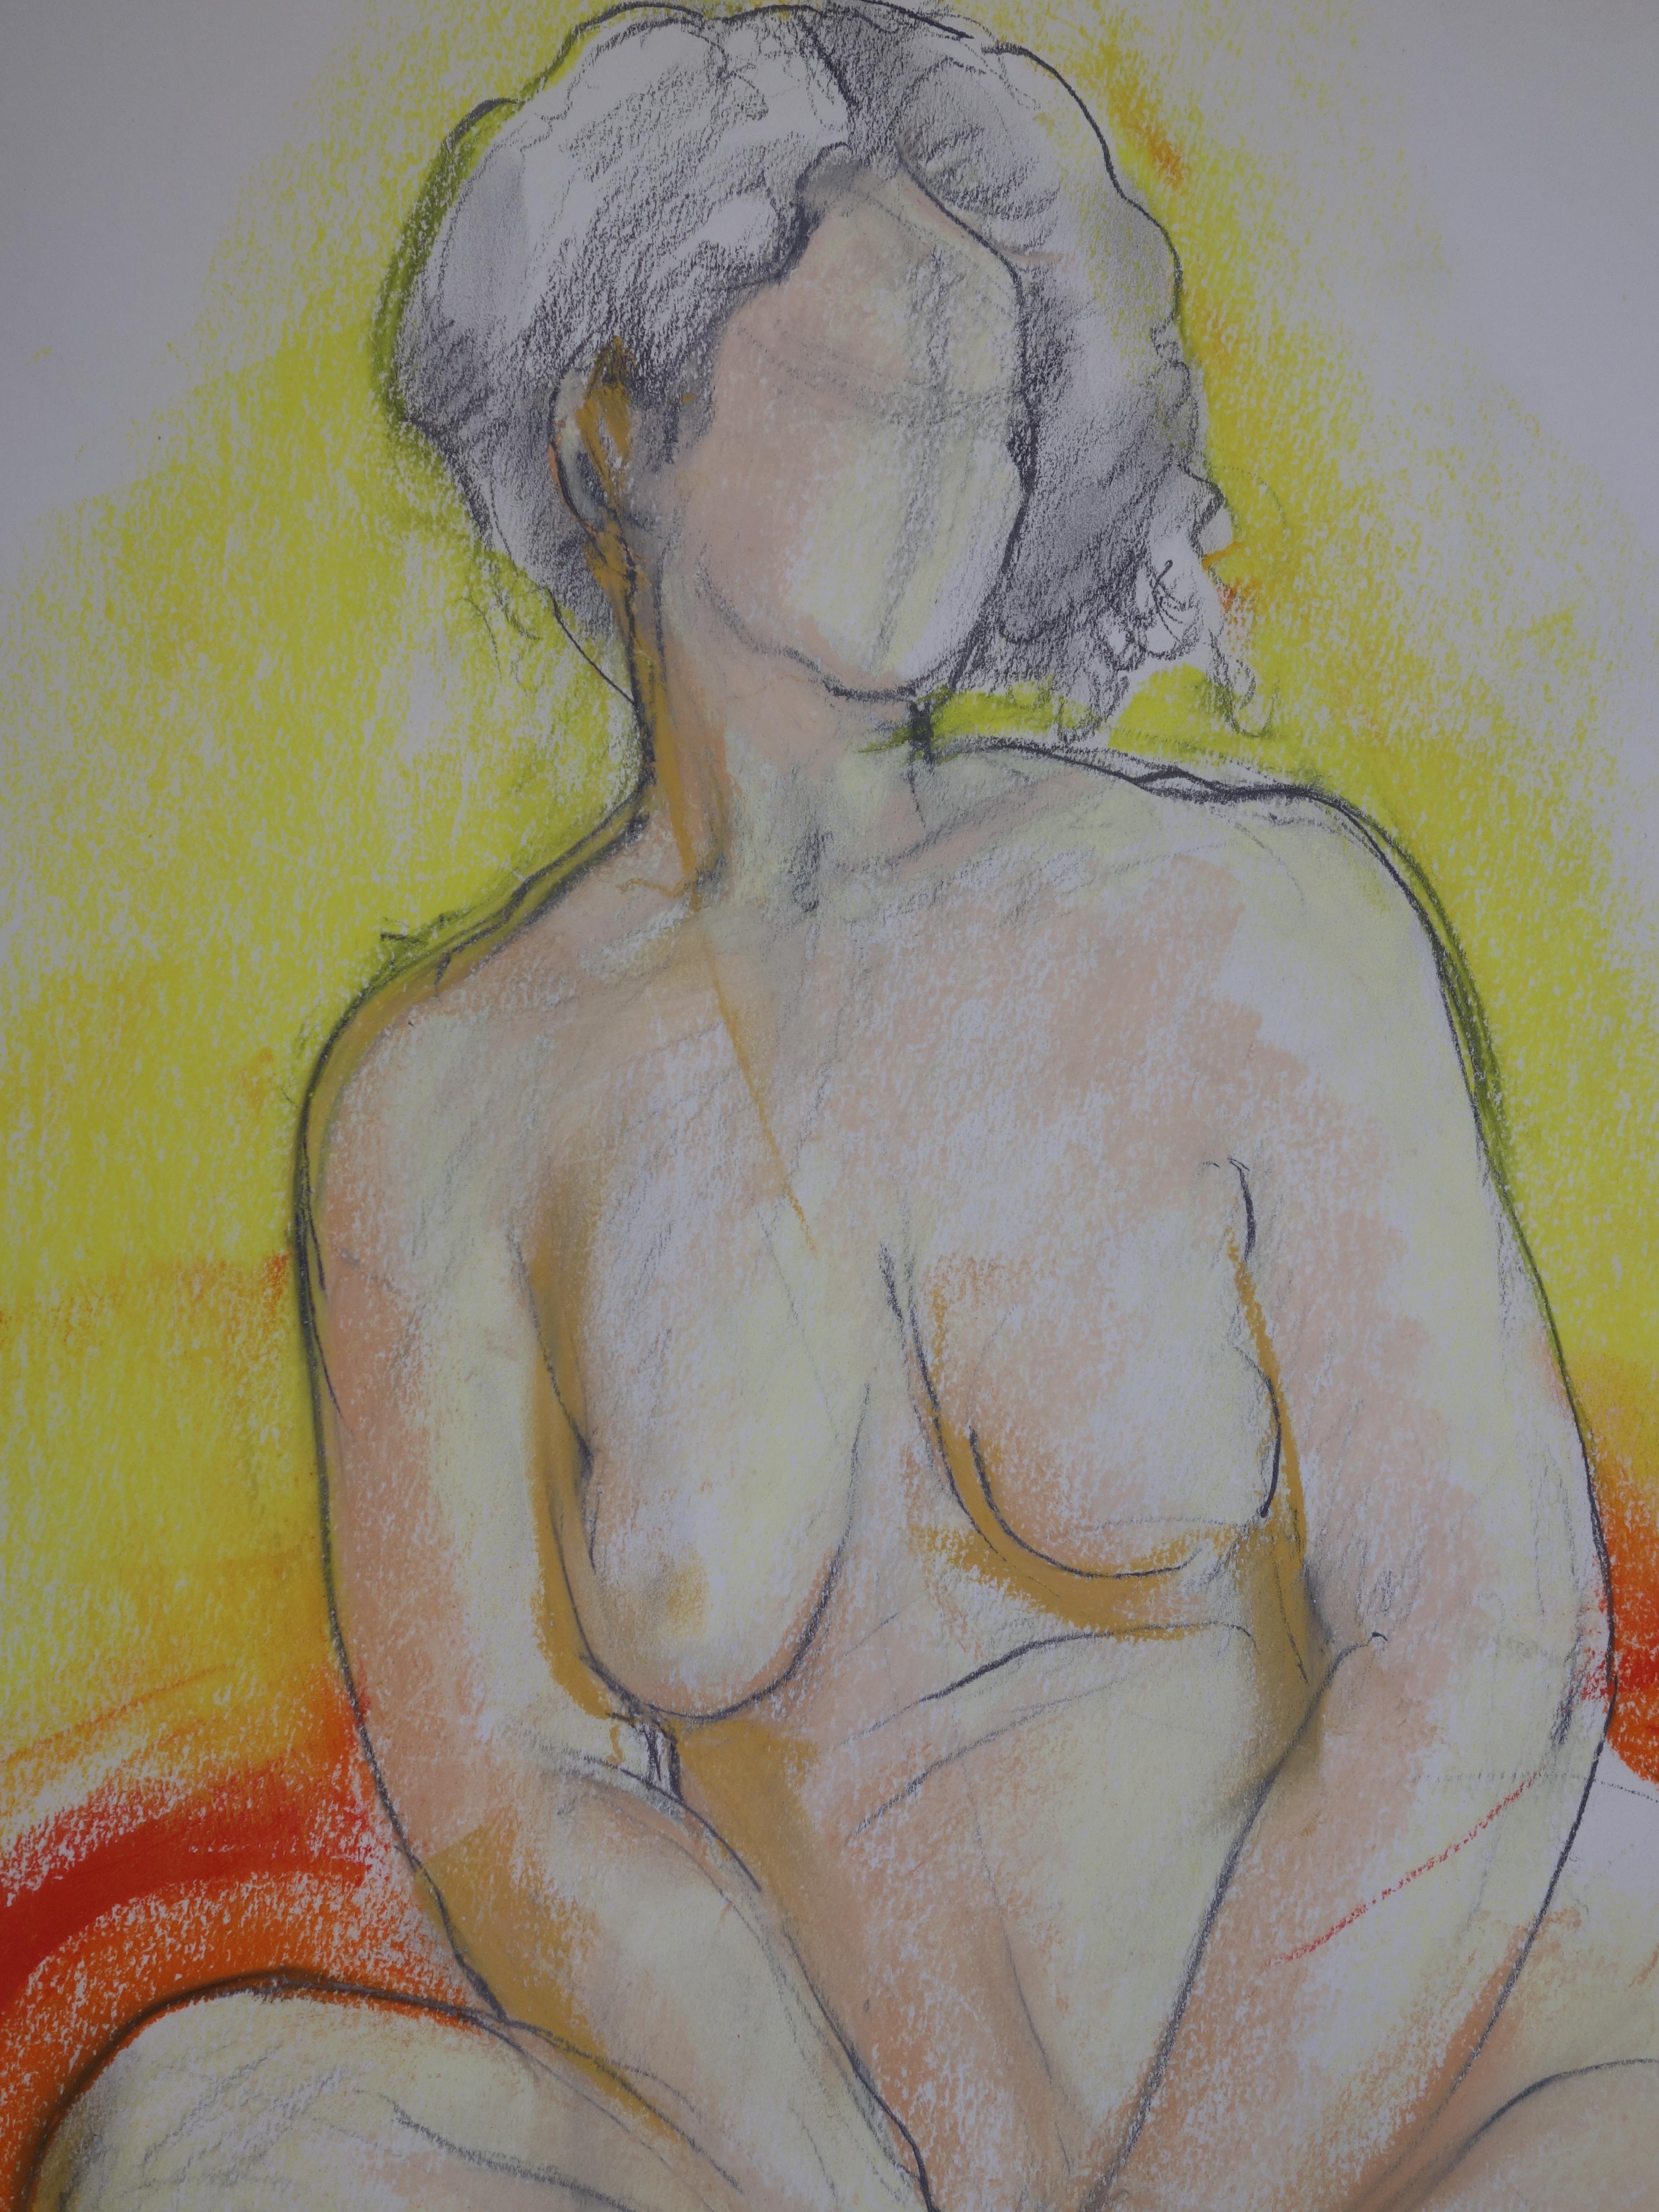 Gaston COPPENS (1909 - 2002)
Nude Seated on Red Pillow

Original charcoal drawing
Signed bottom left
Stamp of the artist studio on the back
On wove paper 41 x 32 cm (c. 16 x 13 inch)

Excellent condition

Gaston Coppens studied sculpture in the